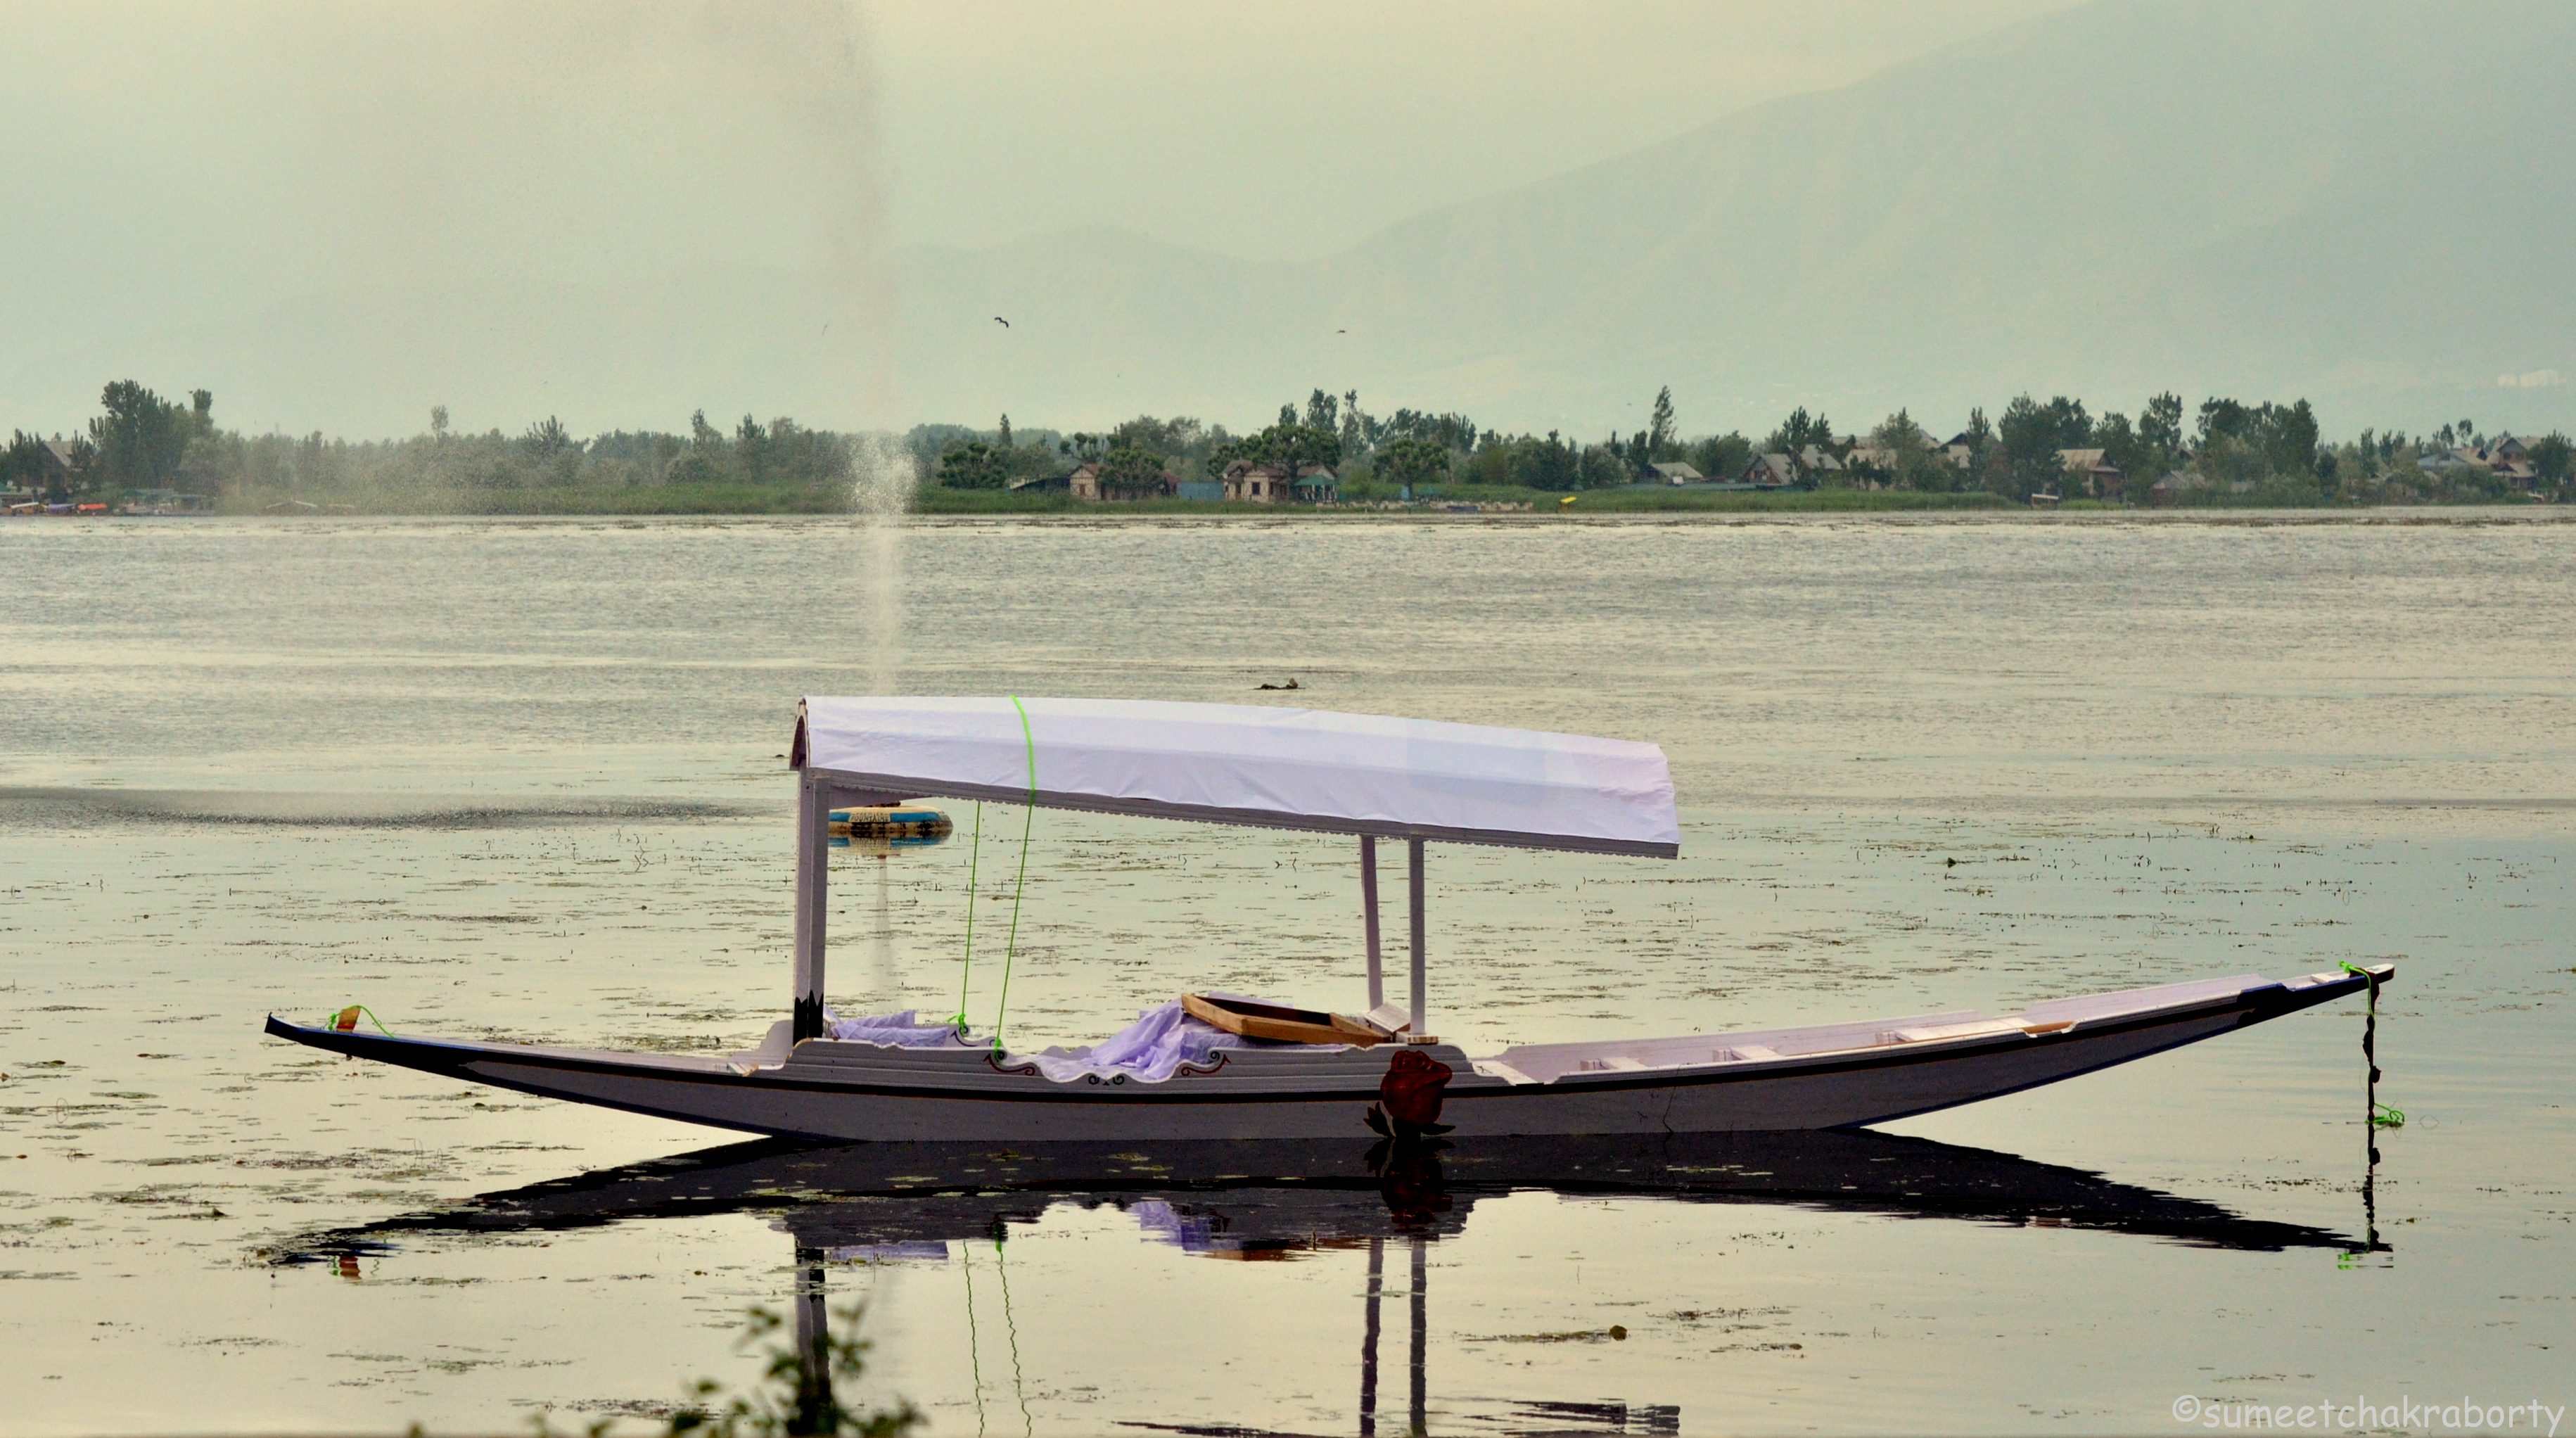 A glimpse of life at Dal Lake … A pictorial journey